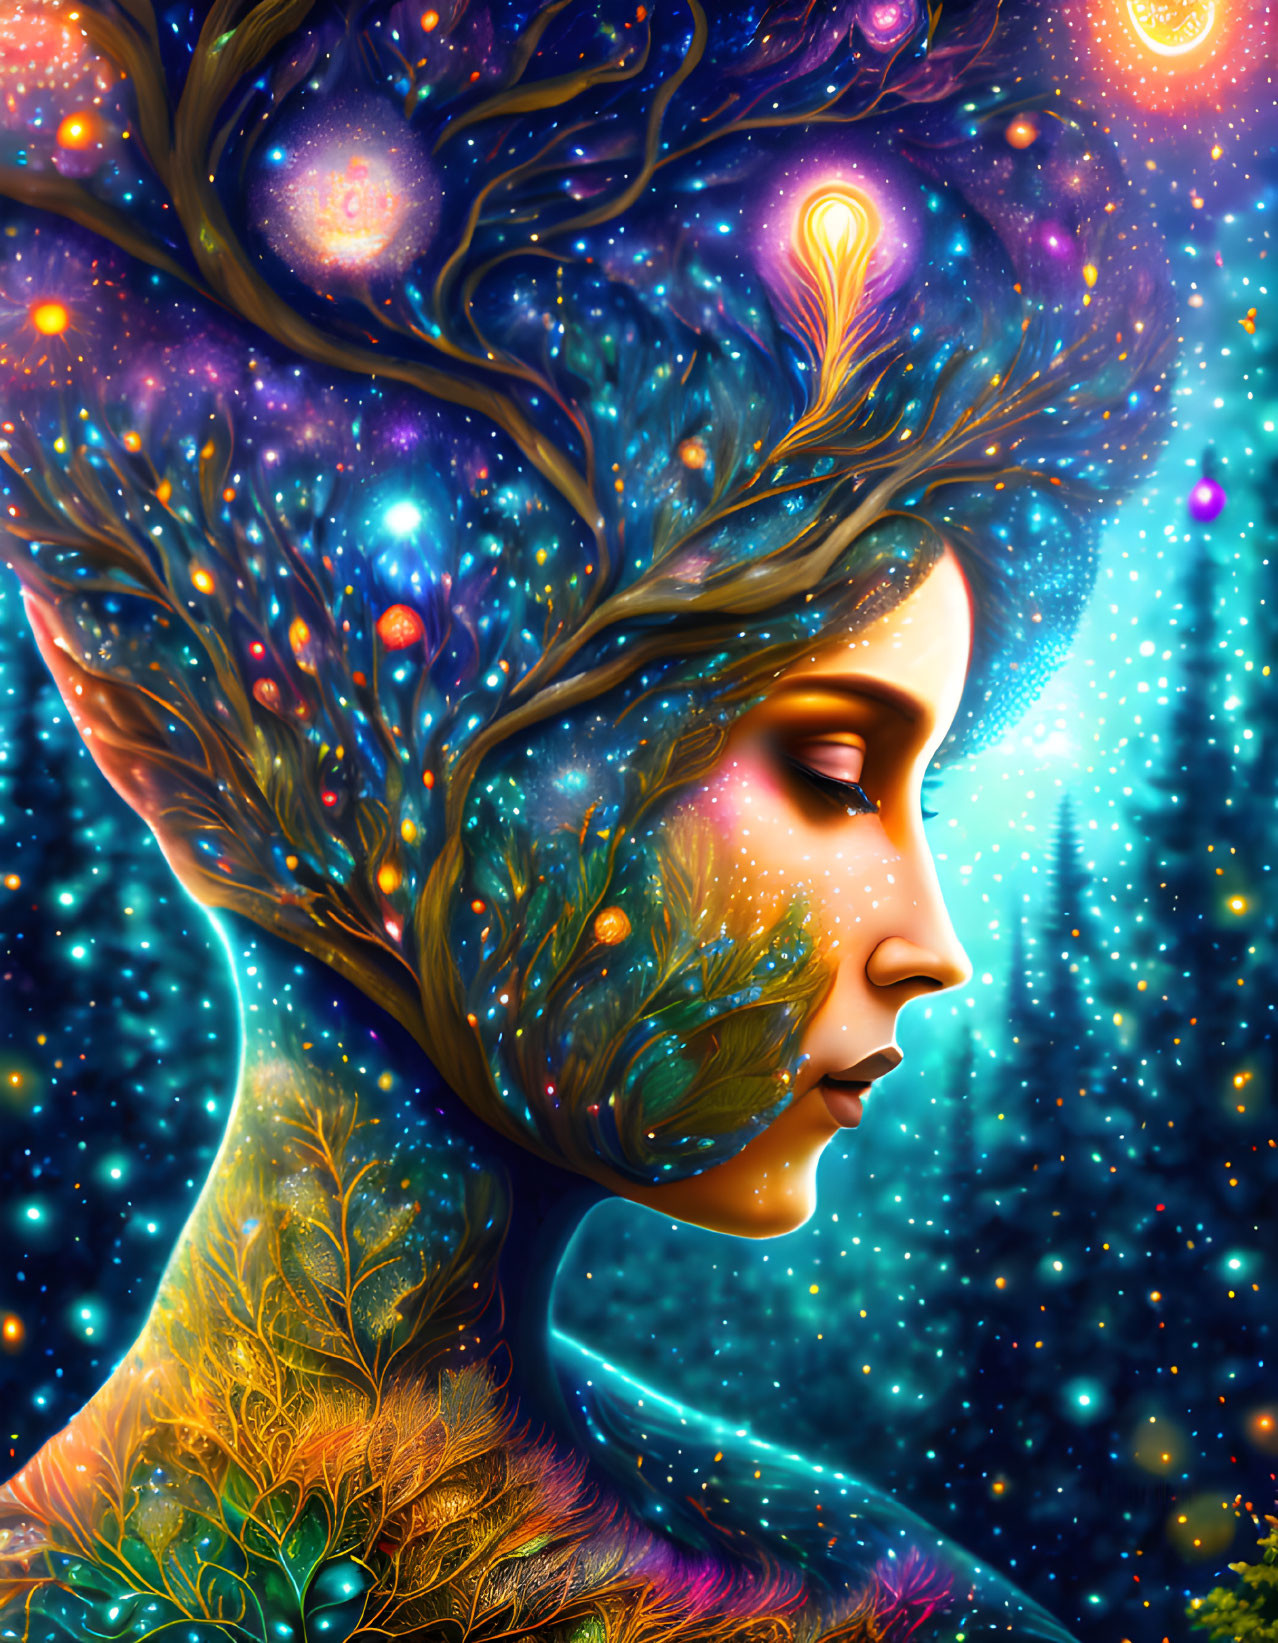 Colorful cosmic entity with tree-like structure and stars in tranquil face.